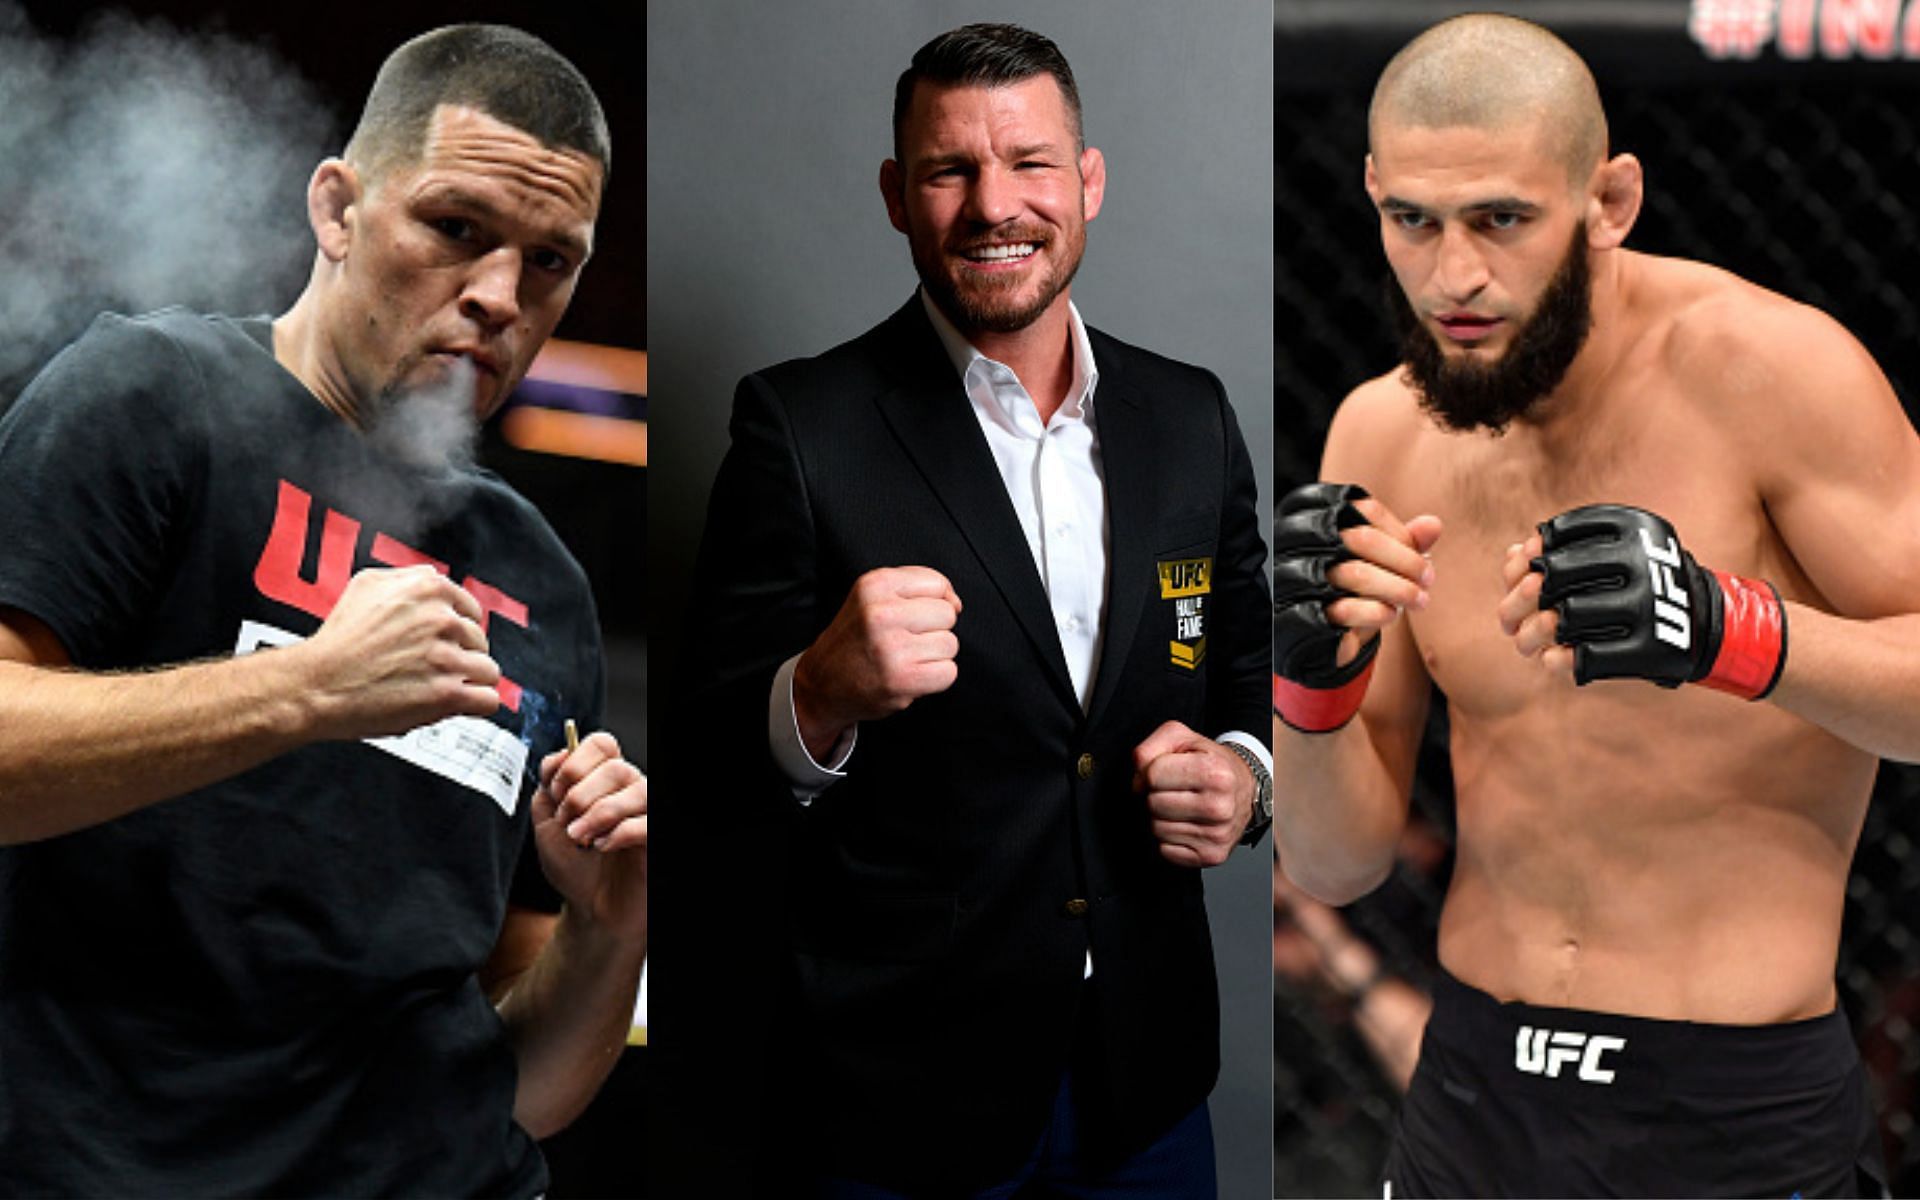 Nate Diaz (left), Michael Bisping (middle), and Khamzat Chimaev (right)(Images via Getty)